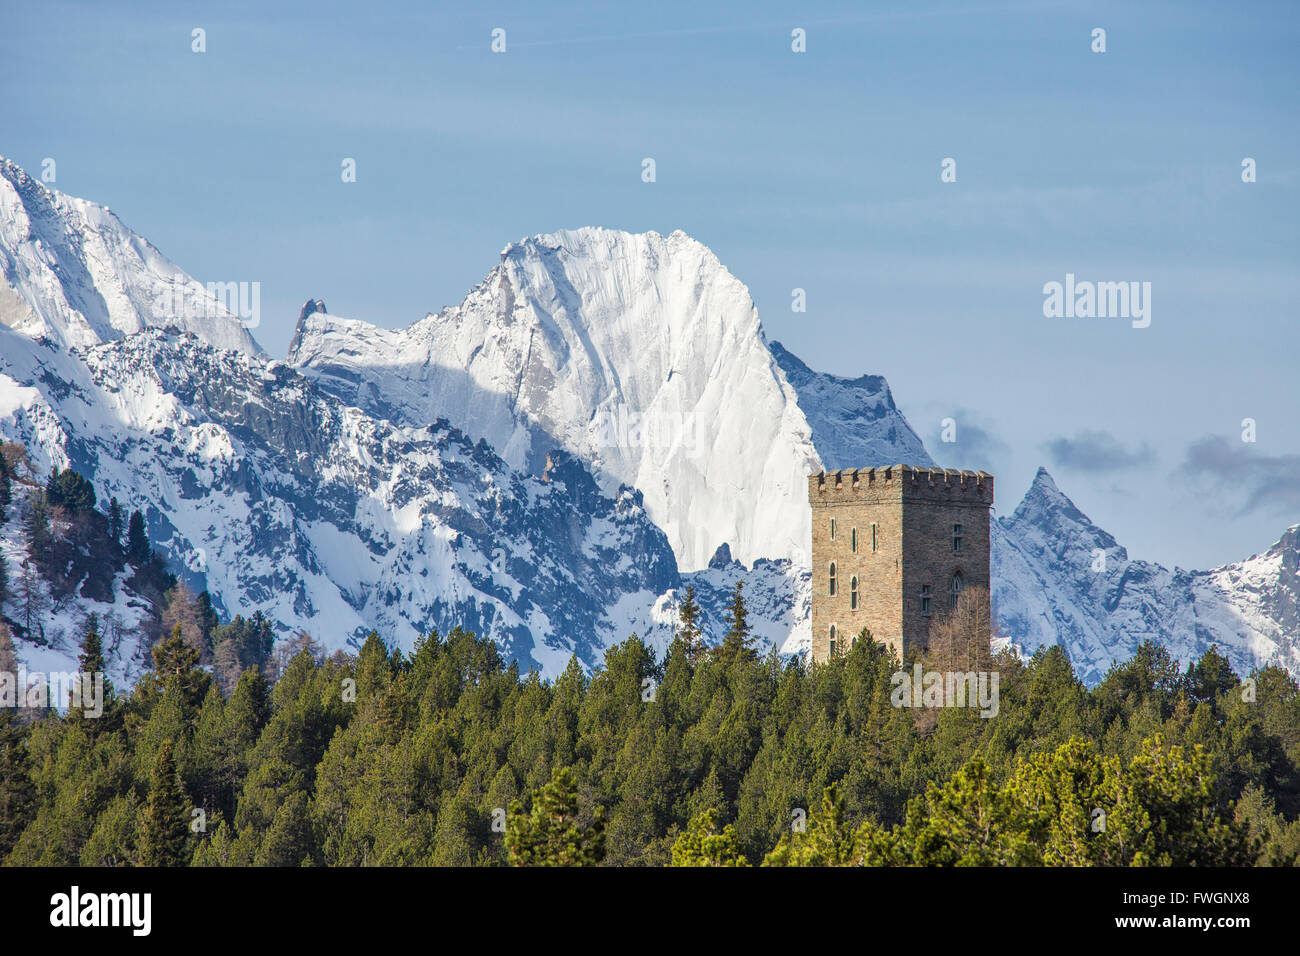 The Belvedere Tower frames the snowy peaks and Peak Badile on a spring day, Maloja Pass, Canton of Graubunden, Switzerland Stock Photo